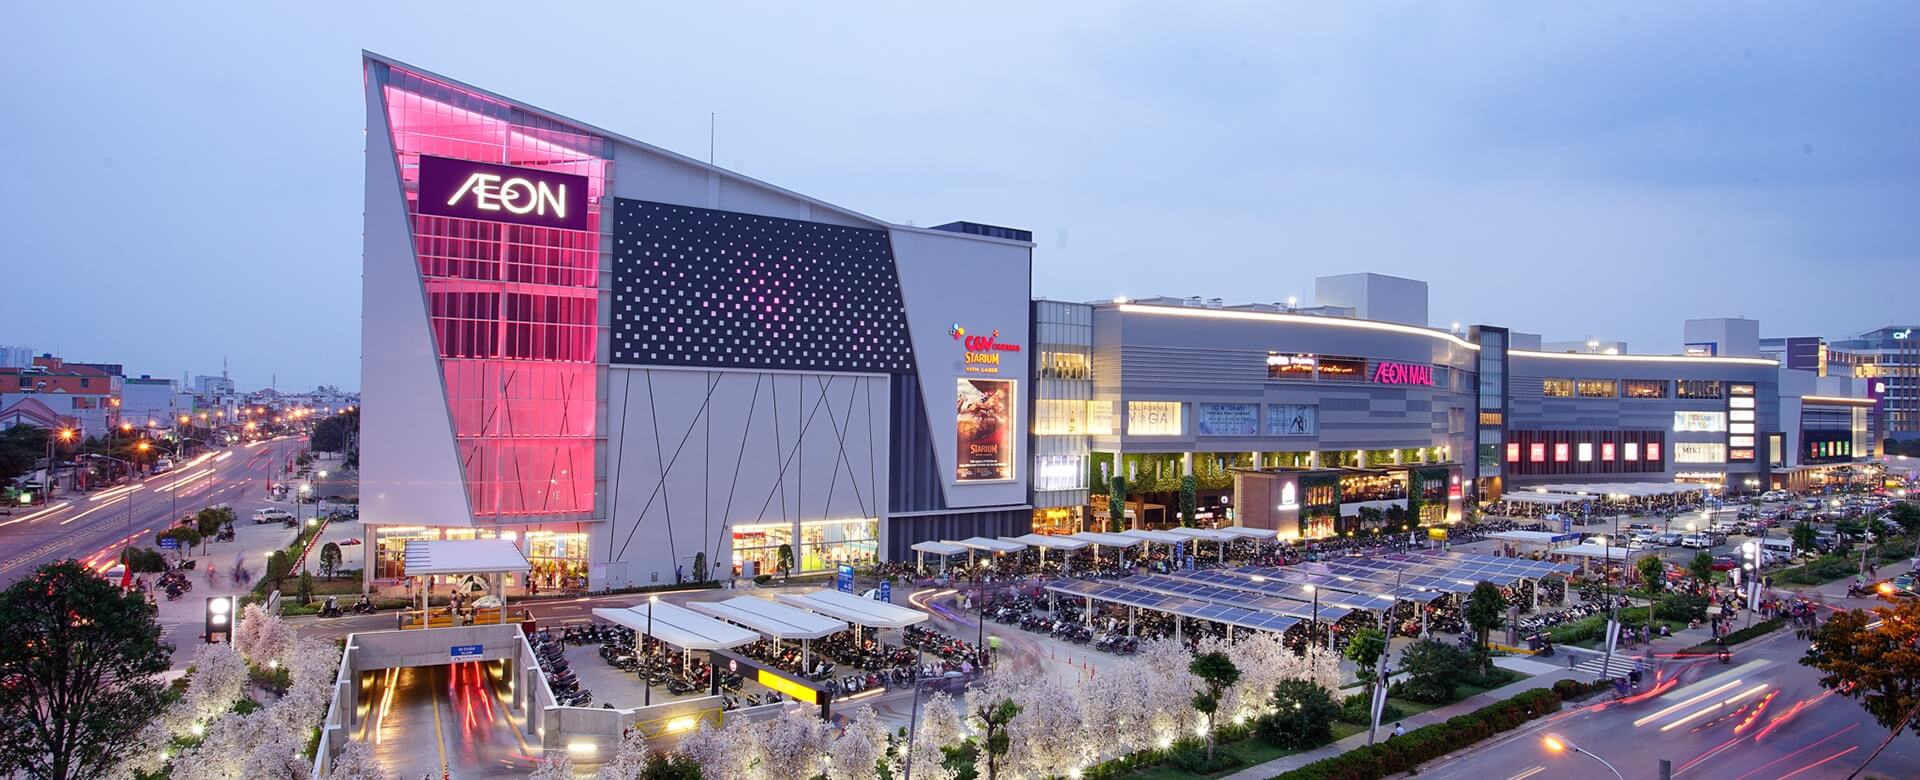 AEON Mall is one of the most famous shopping malls in Hanoi